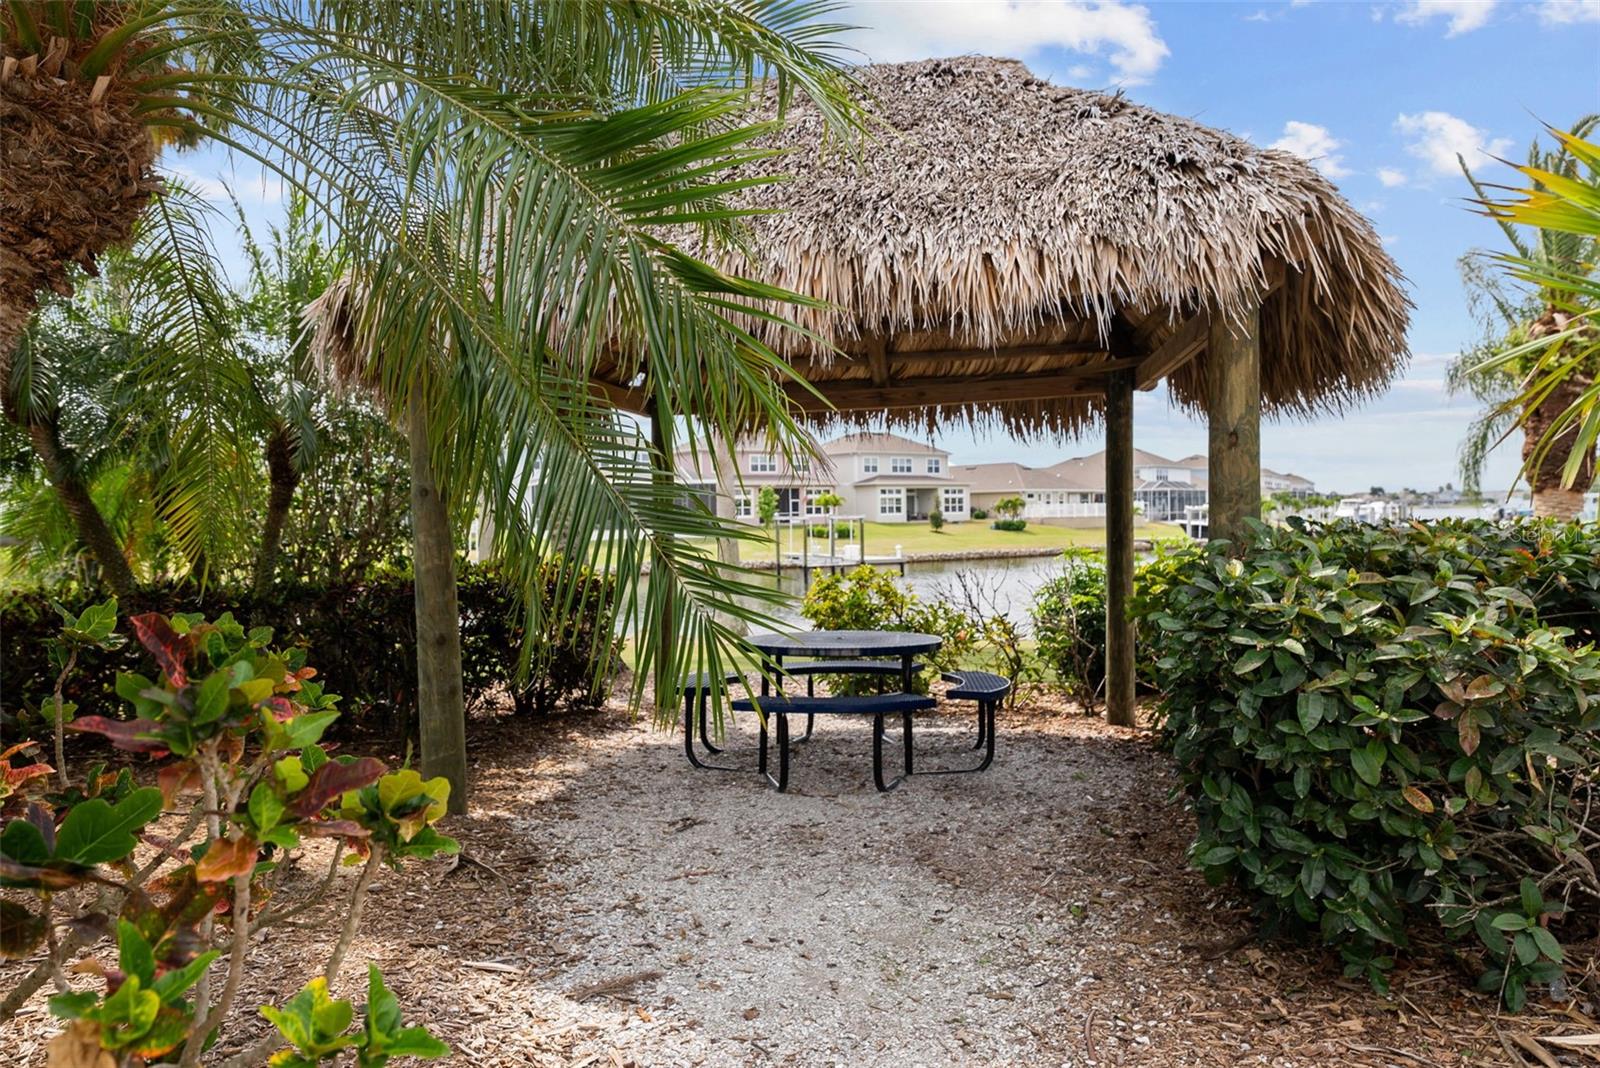 The Landings Park provides playground, playing field, picnic areas, tiki huts, boat ramp & kayak launch.